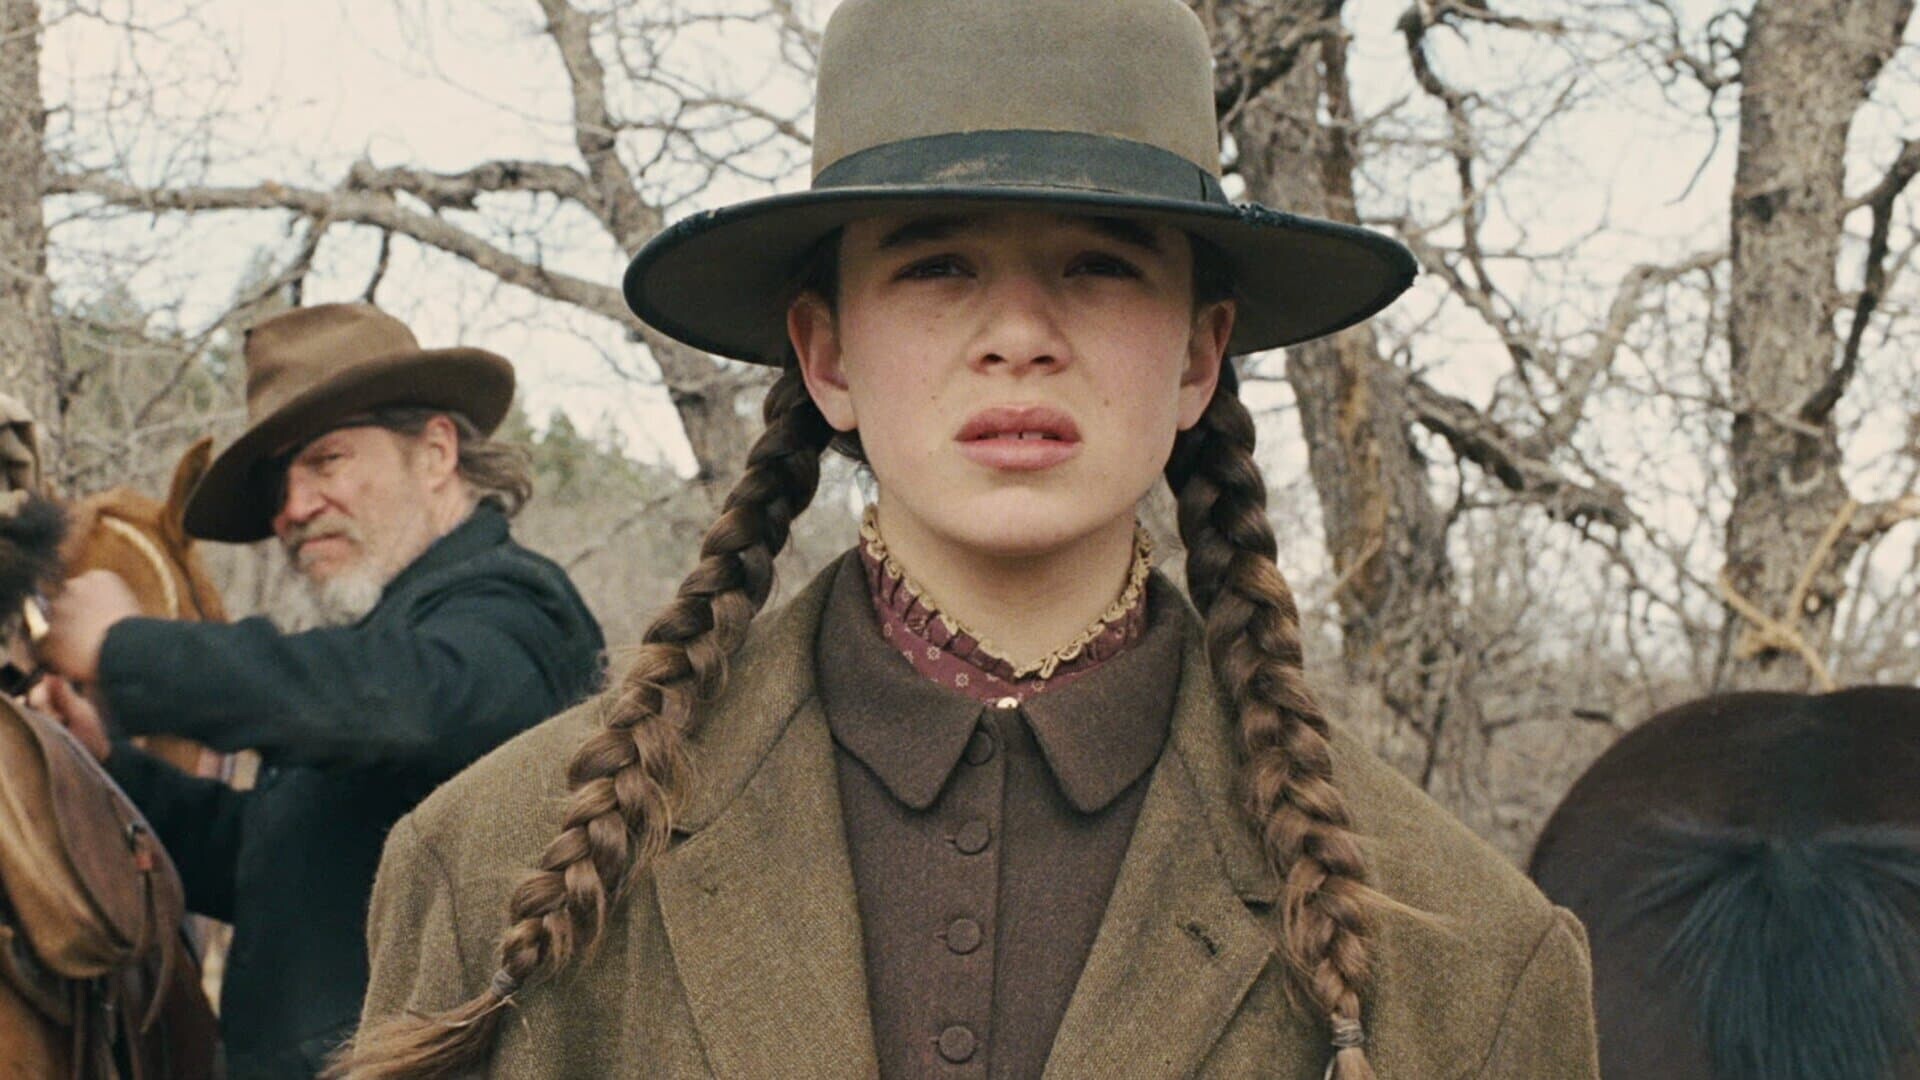 True Grit (Movie): Mattalyn Ross, The daughter of Frank Ross, A friend of Rooster Cogburn, Portrayed by Haliee Steinfeld. 1920x1080 Full HD Wallpaper.